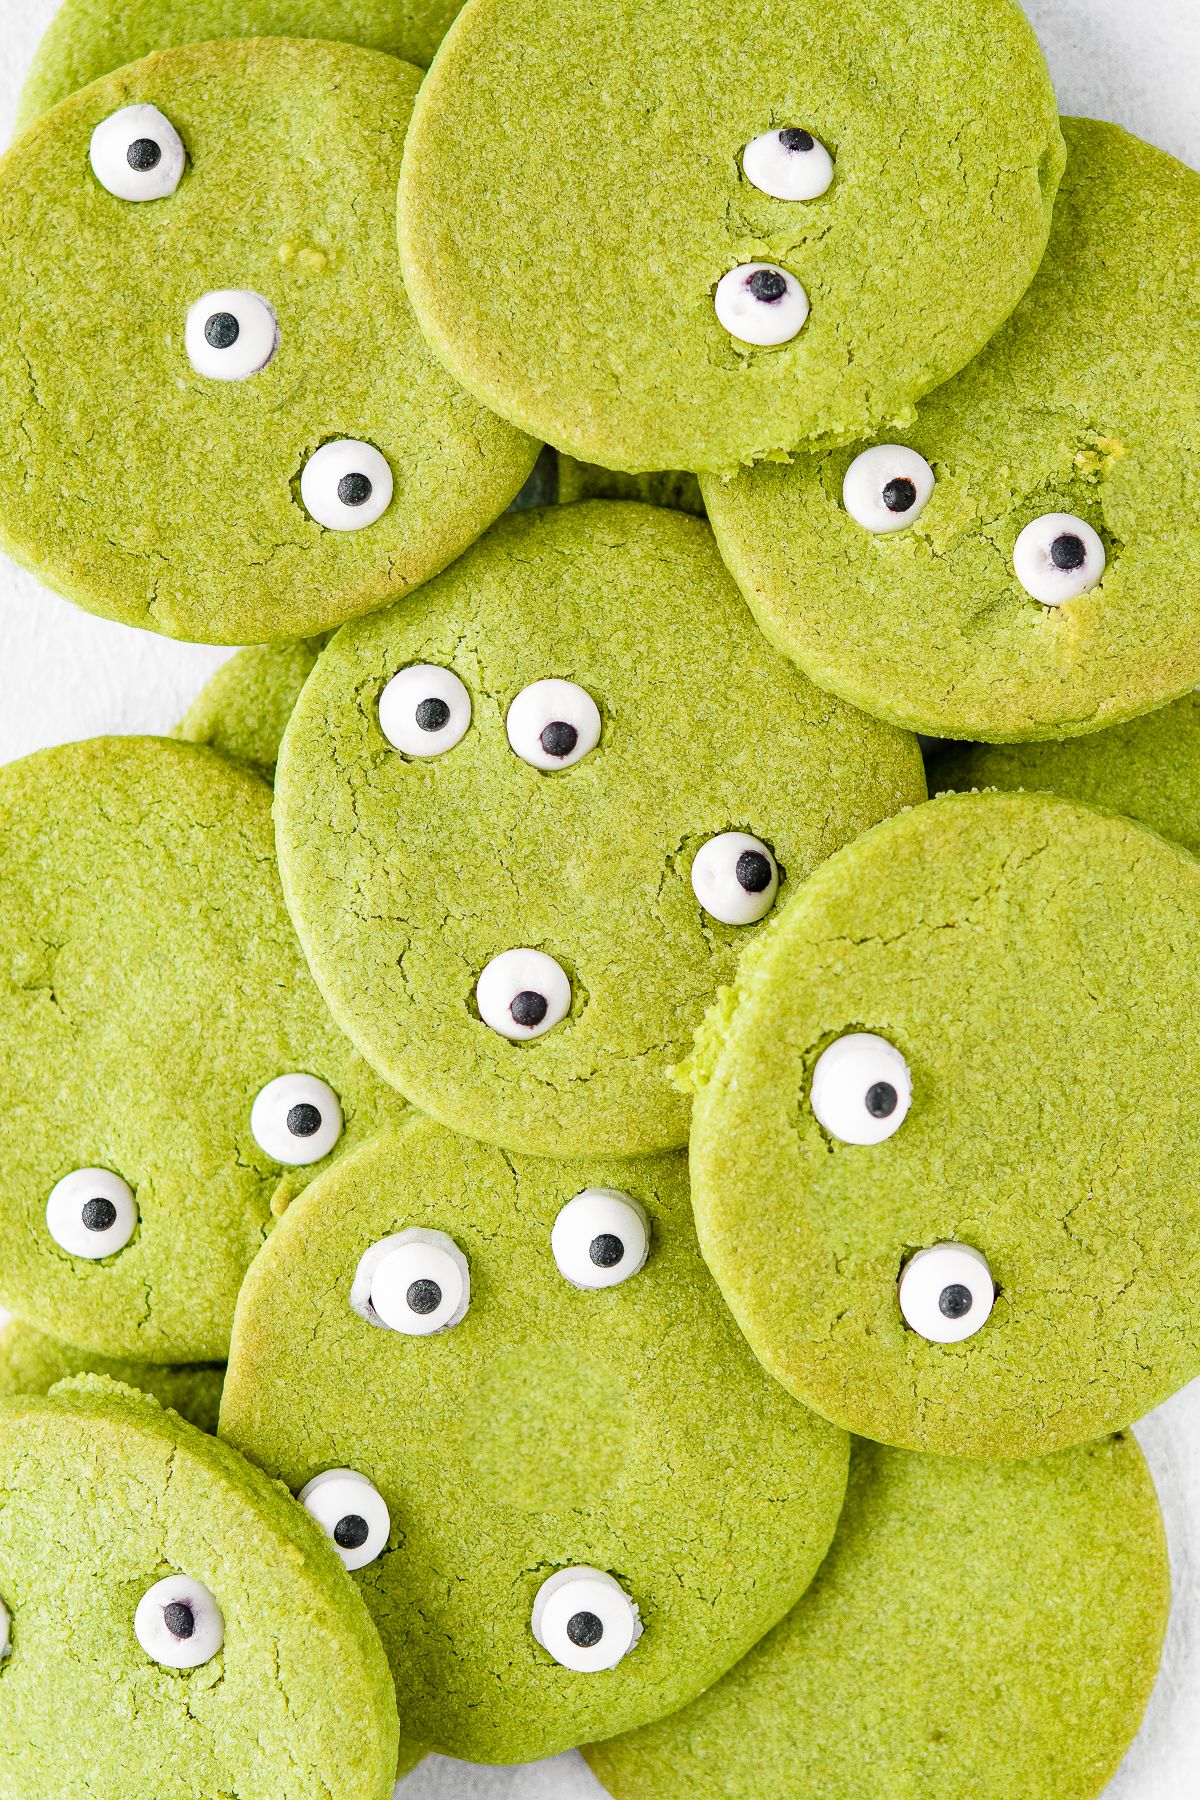 Matcha cookies for Halloween, round green cookies with candy eyes for a monster effect.